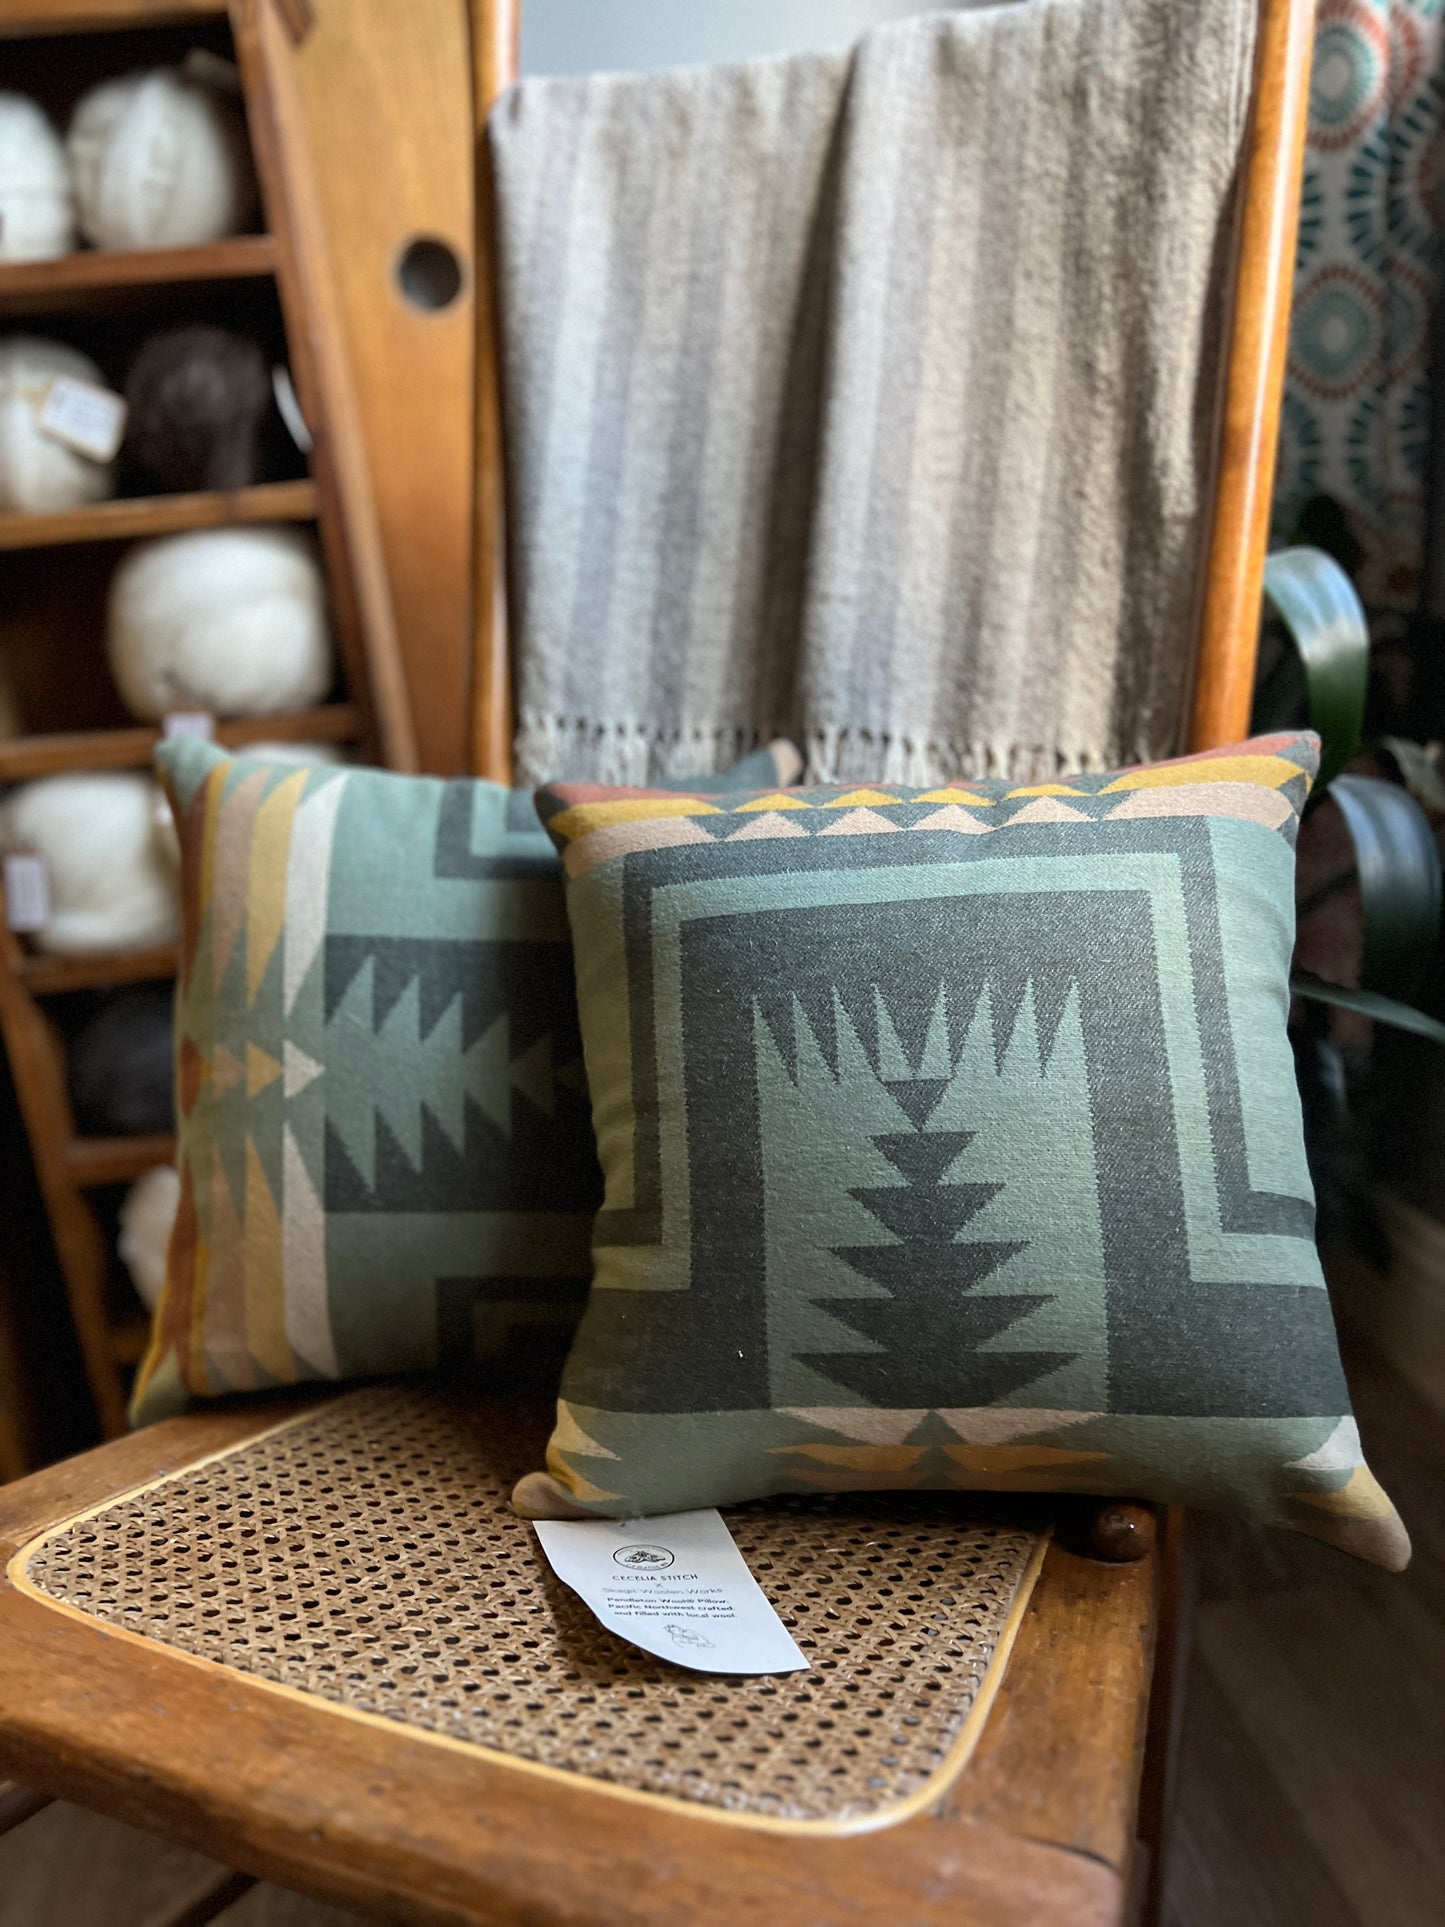 Limited Edition - Wool Stuffed Pendleton Throw Pillows